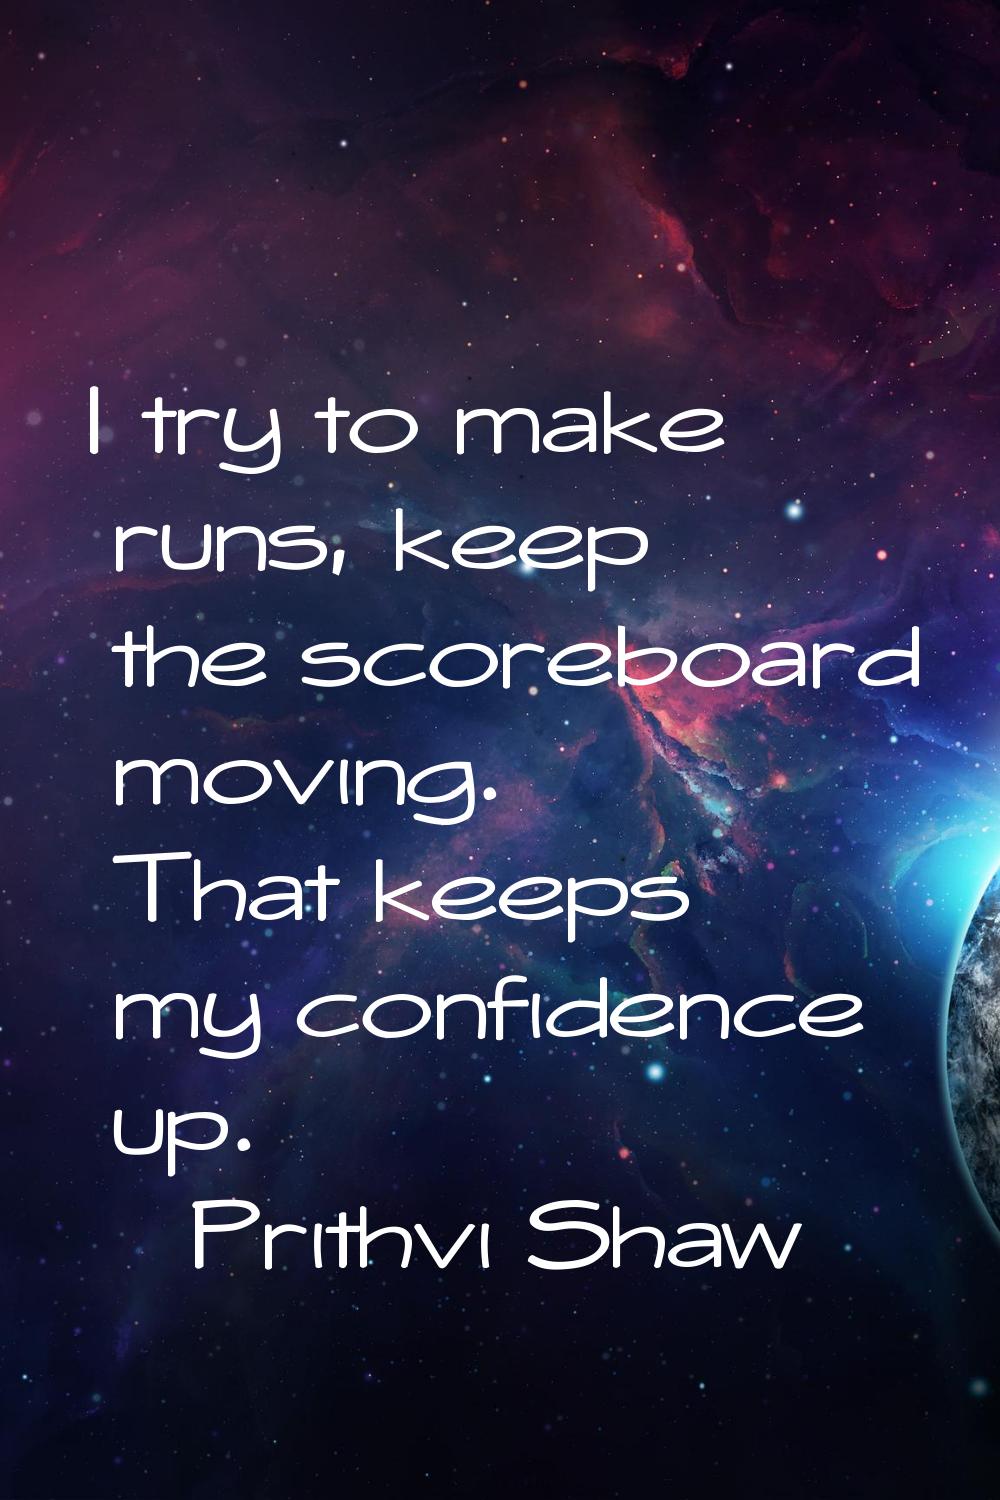 I try to make runs, keep the scoreboard moving. That keeps my confidence up.